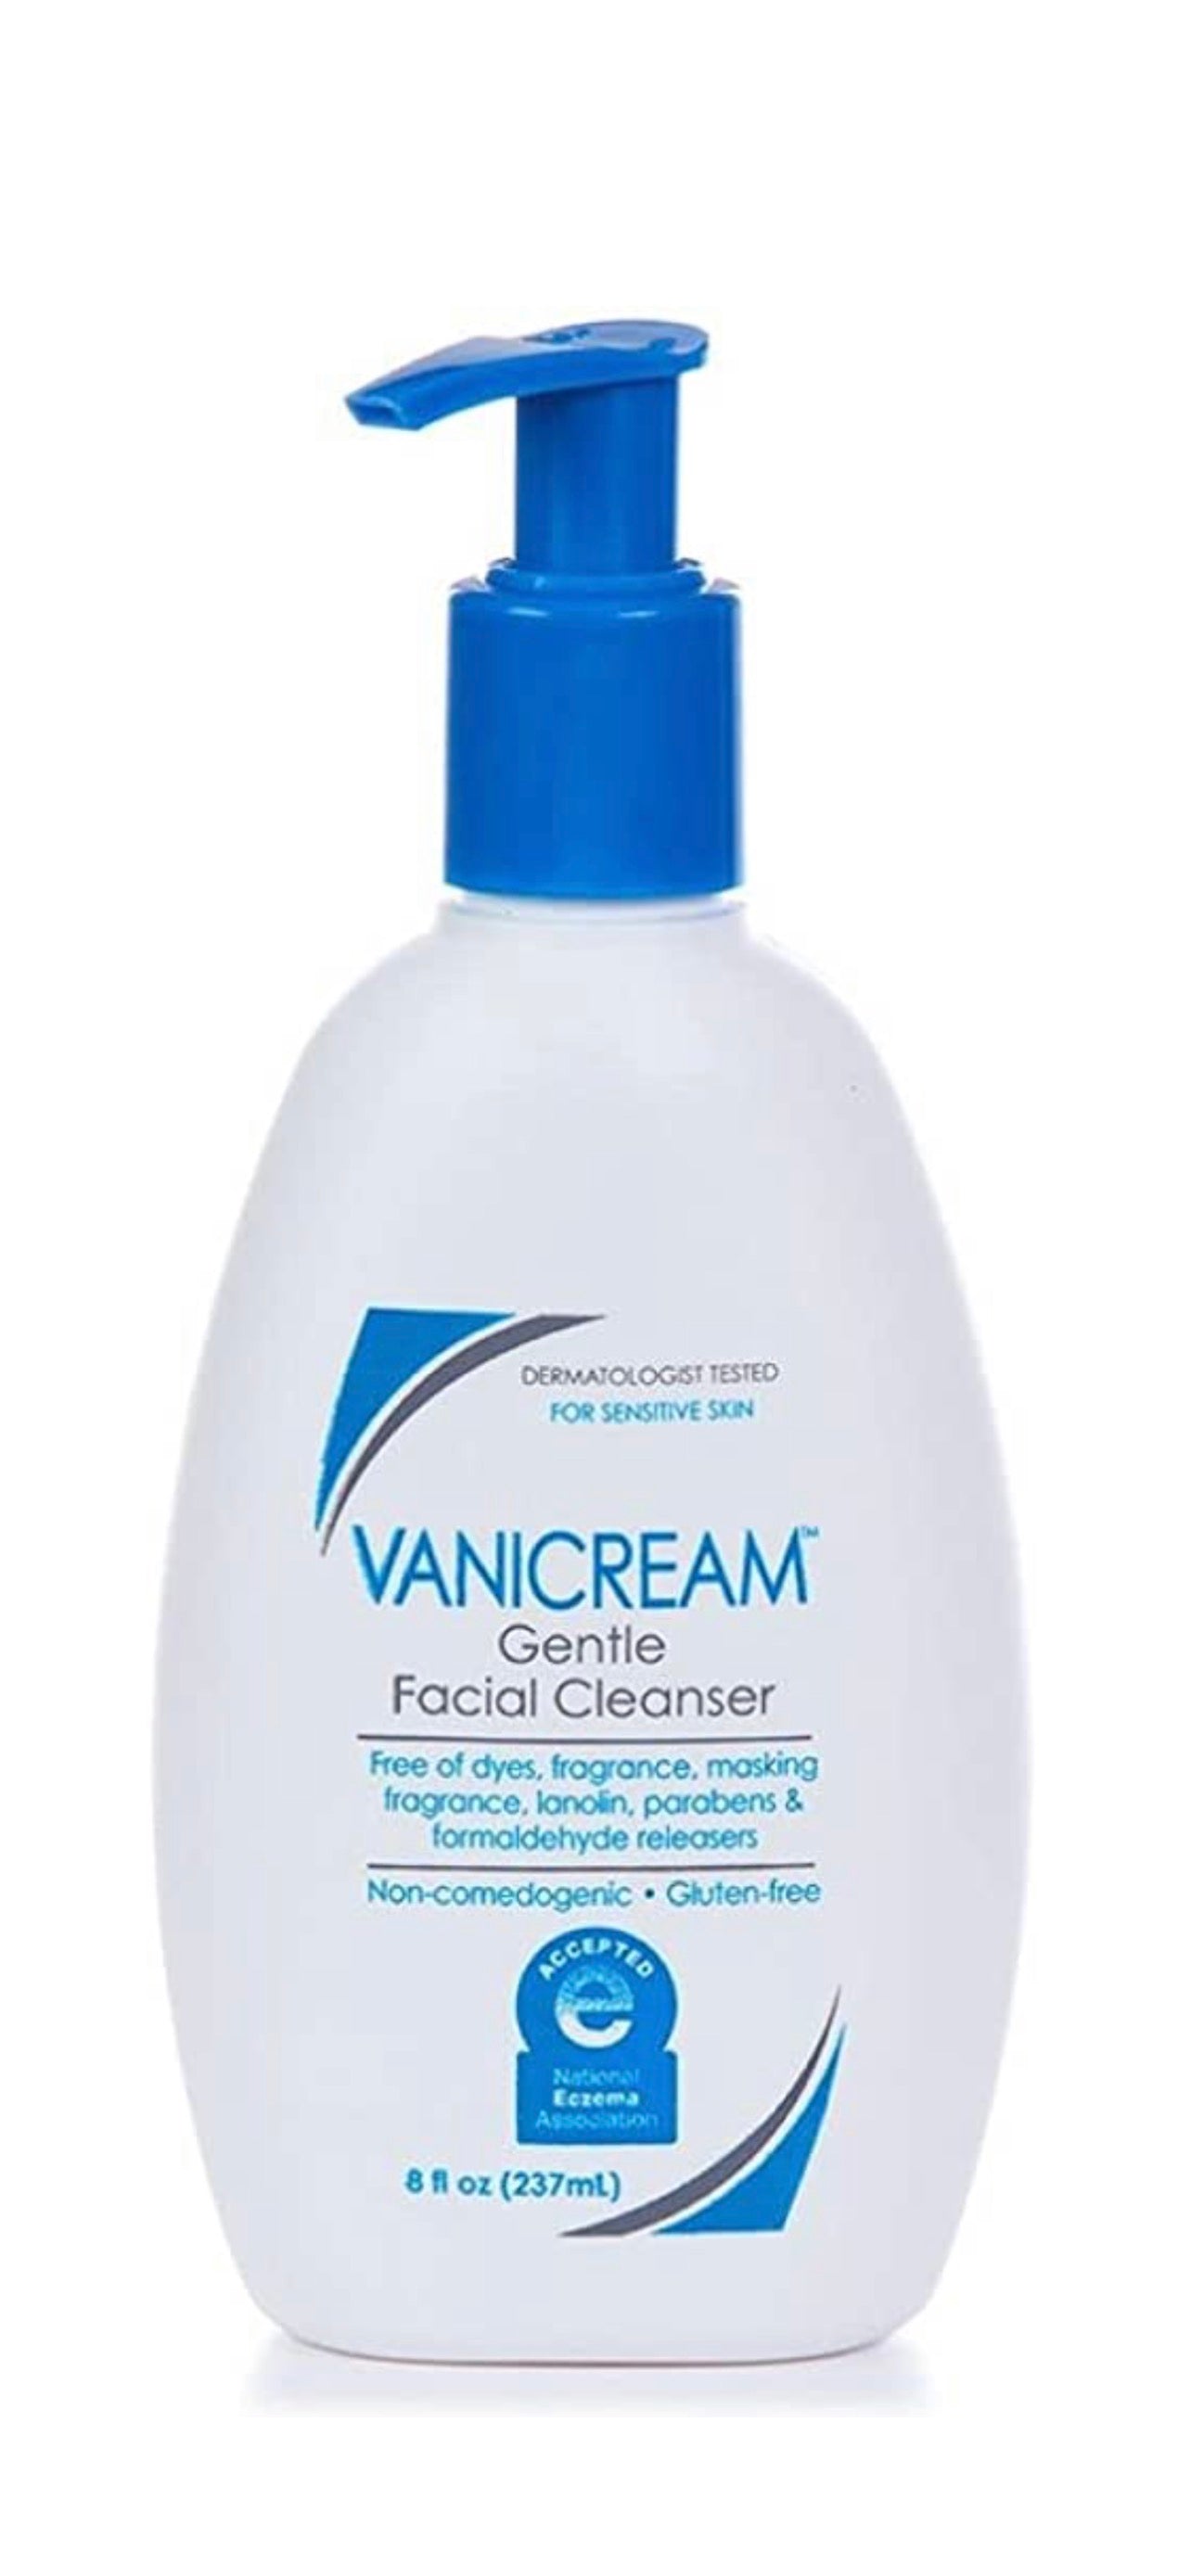 Vanicream Gentle Facial Cleanser with Pump Dispenser 8 fl oz Formulated Without Common Irritants for Those with Sensitive Skin Supporting ORCRF.org